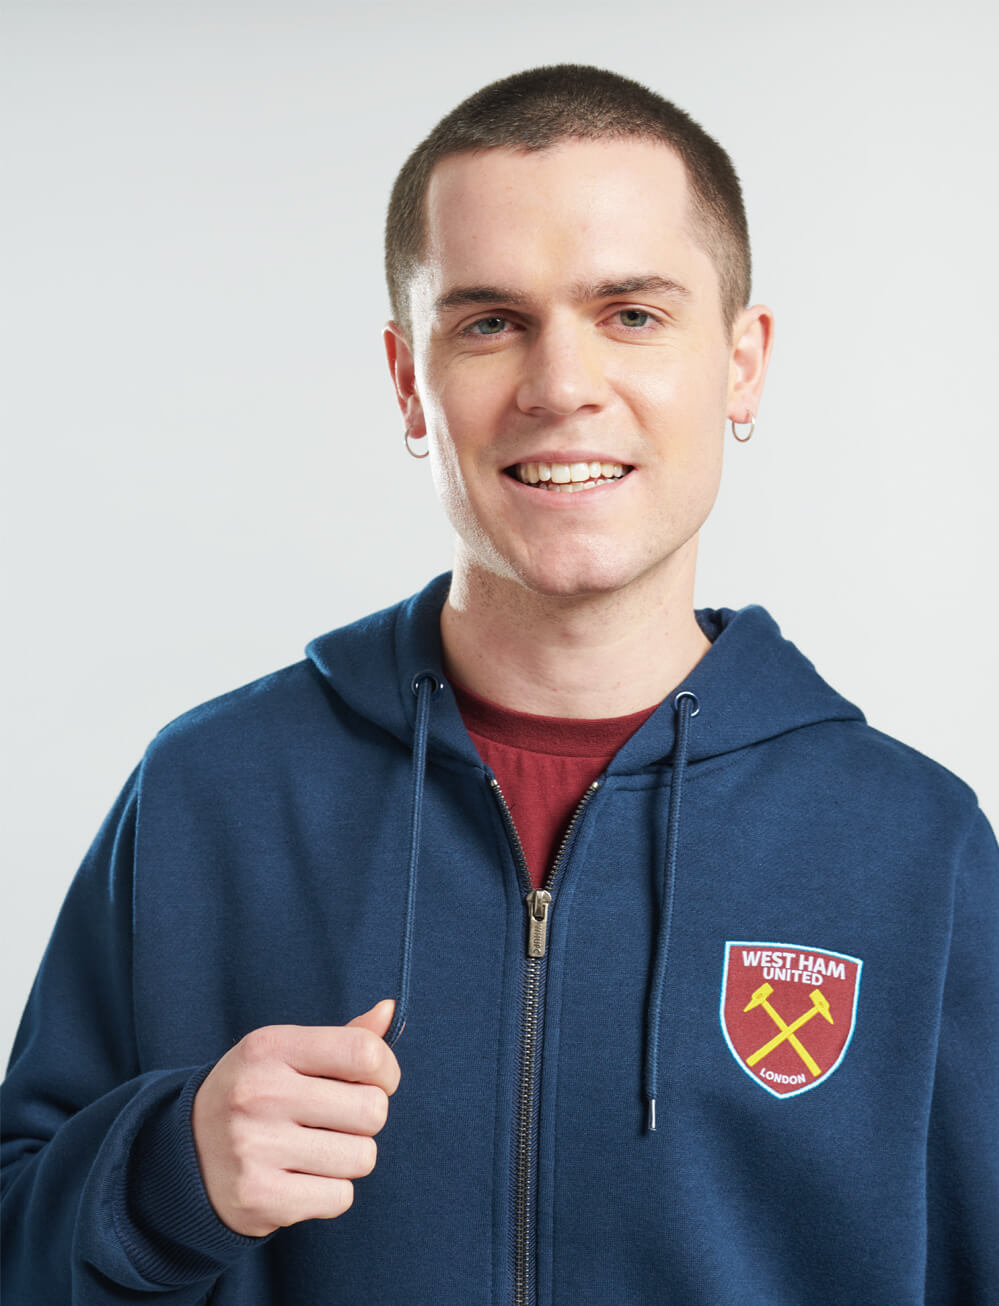 Official West Ham United Zip Hoodie - Navy - The World Football Store